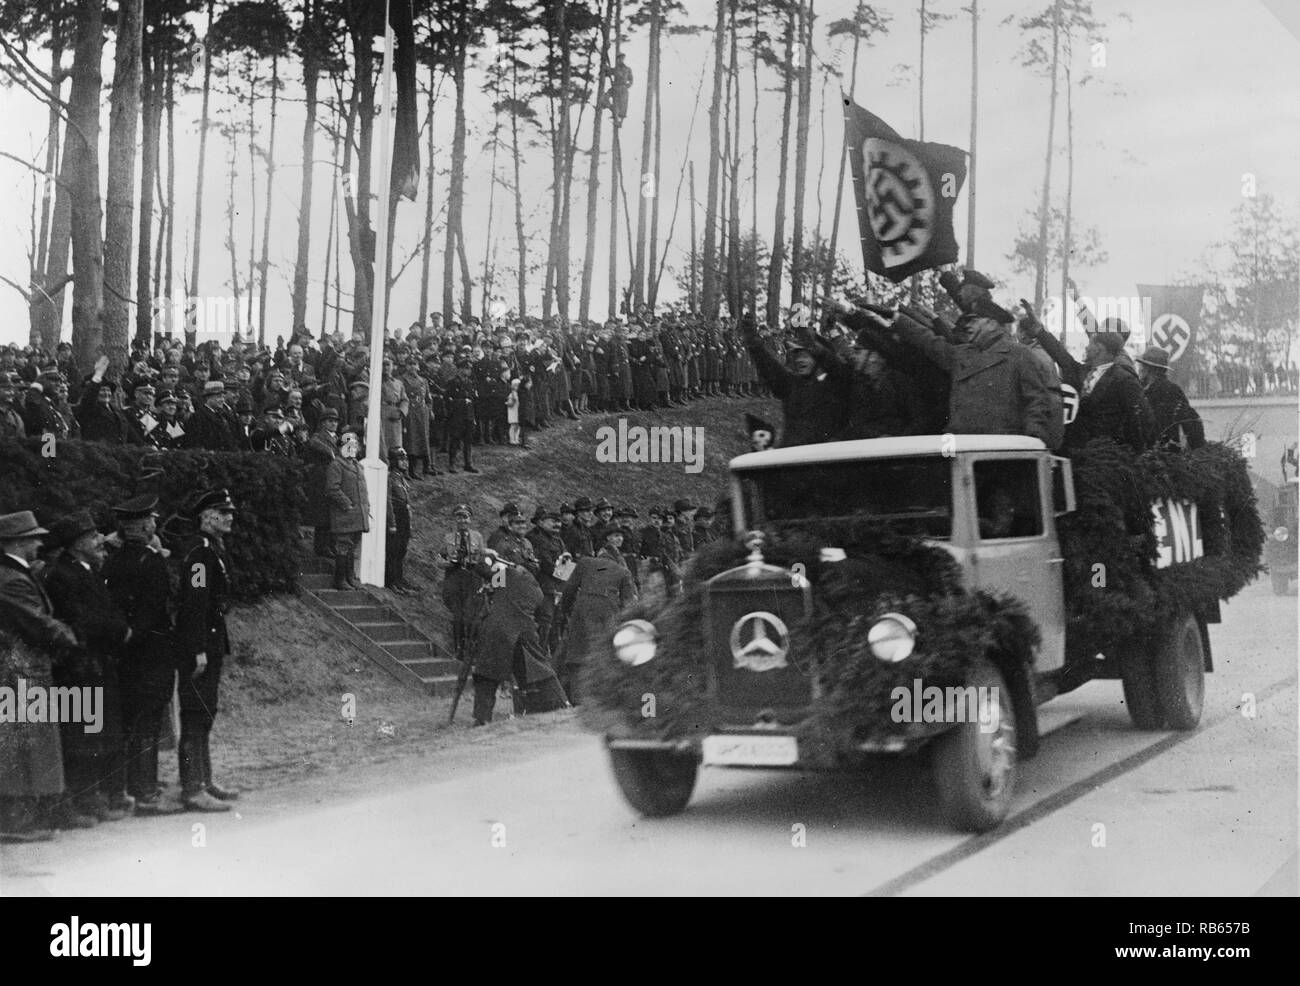 Men standing in the back of a truck salute Hermann Goring and other officials during the inaugural ceremonies for the newly opened Autobahn. Stock Photo